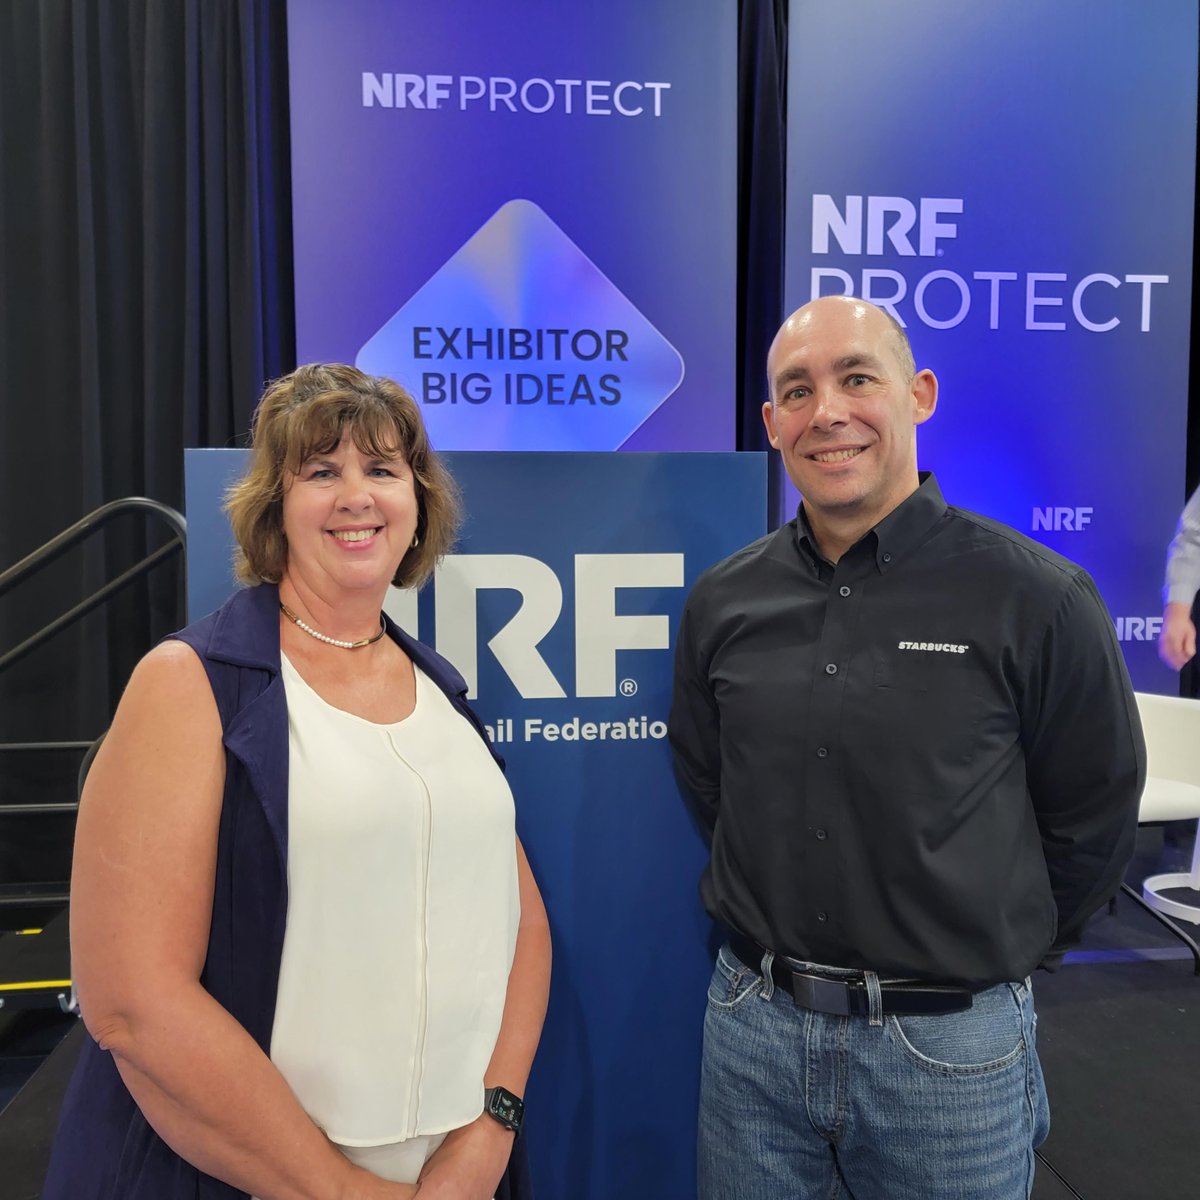 Appriss Retail and Starbucks took the Exhibitor Big Ideas stage at #NRFProtect2023 today to share how investigators can optimize their loss prevention monitoring and performance and focus on the cases that matter most.